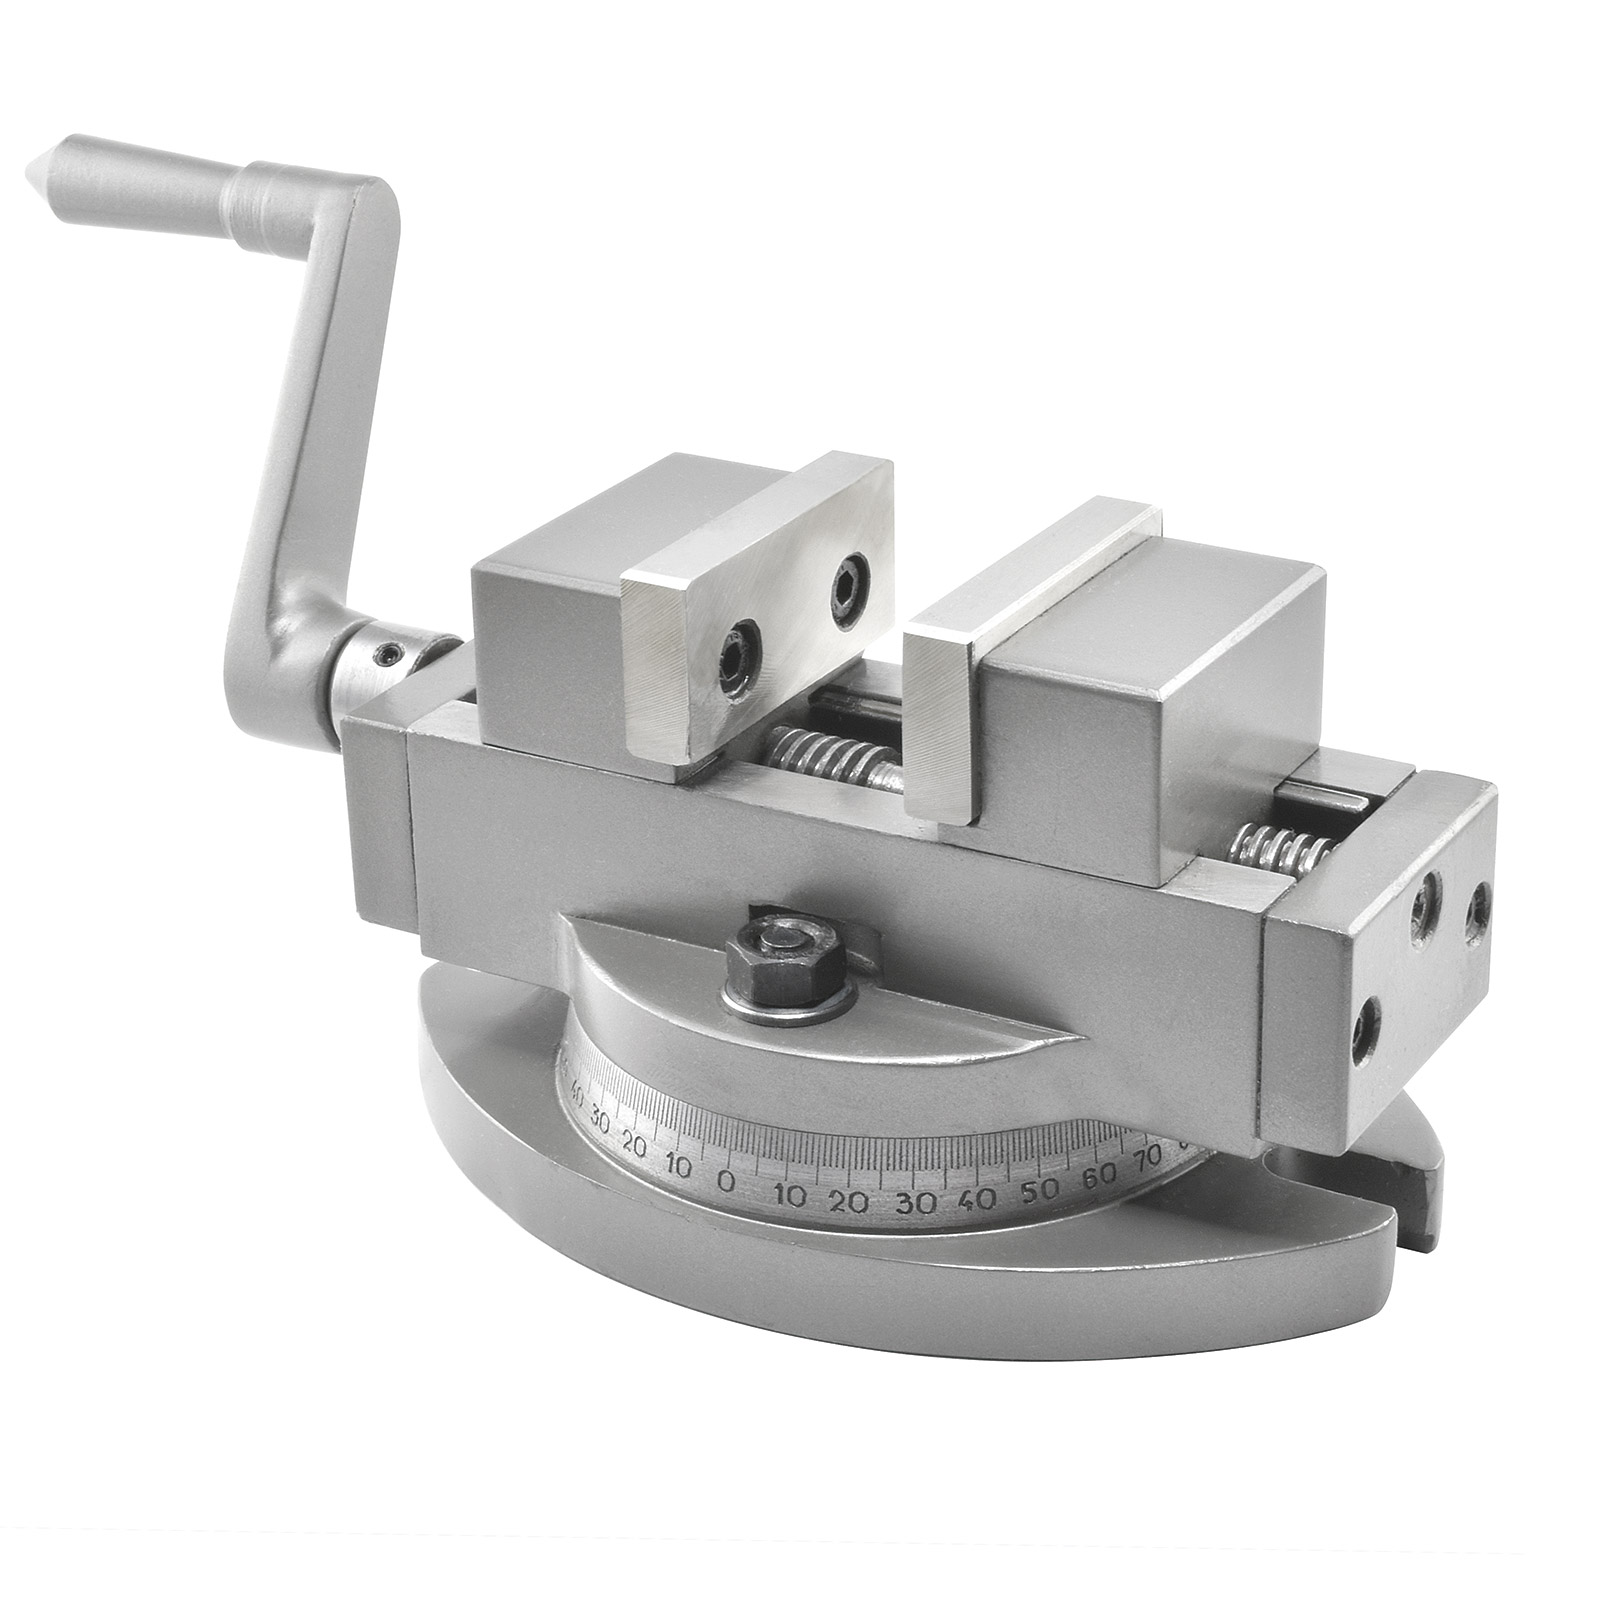 New Precision Vice Self Centering Vise with Swivel Base 2"/50mm Adjustable 360° 